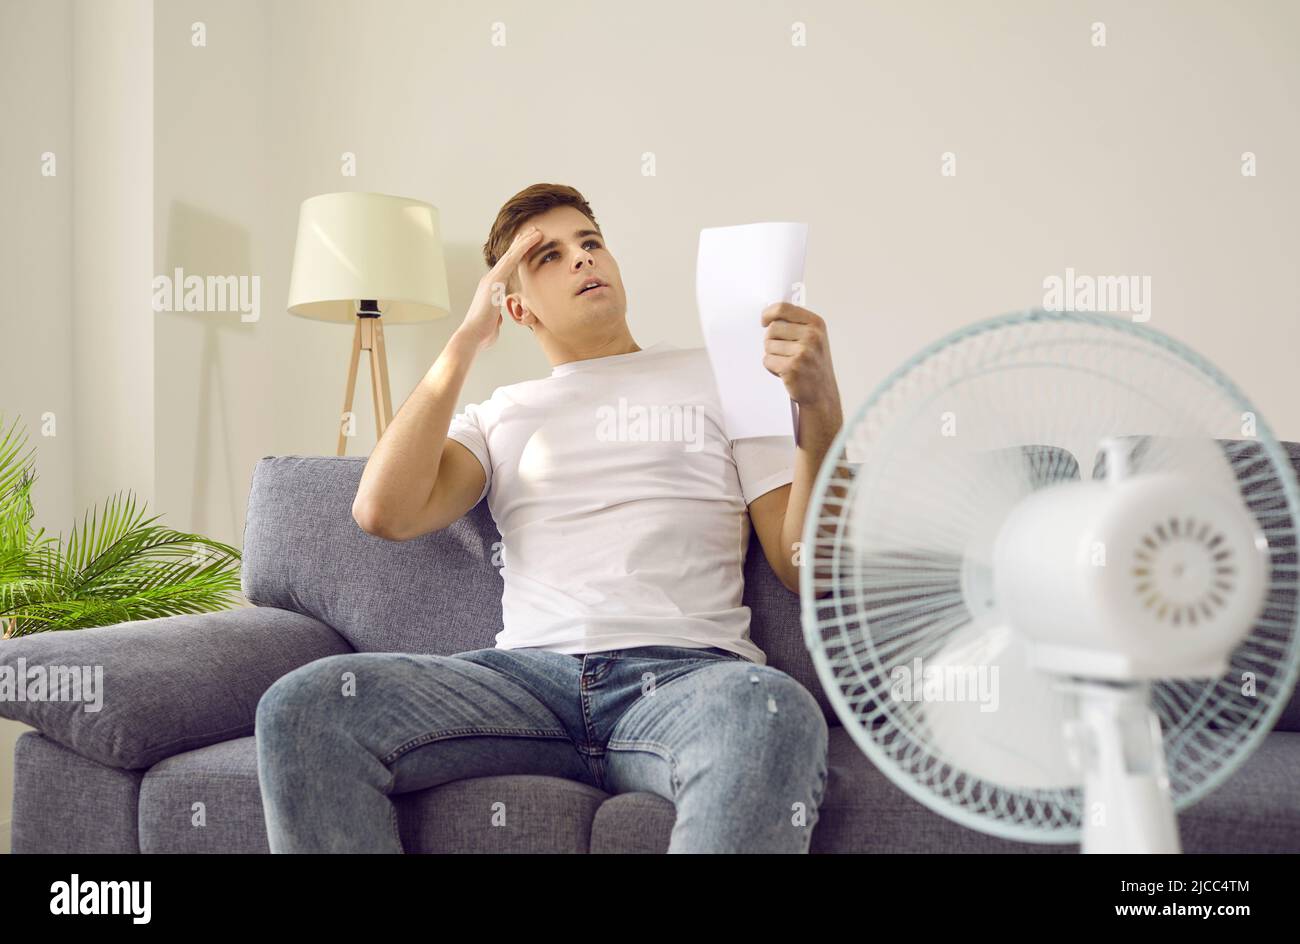 Sweaty man feels bad because of terrible heat sitting at home in front of fan during hot summer days Stock Photo